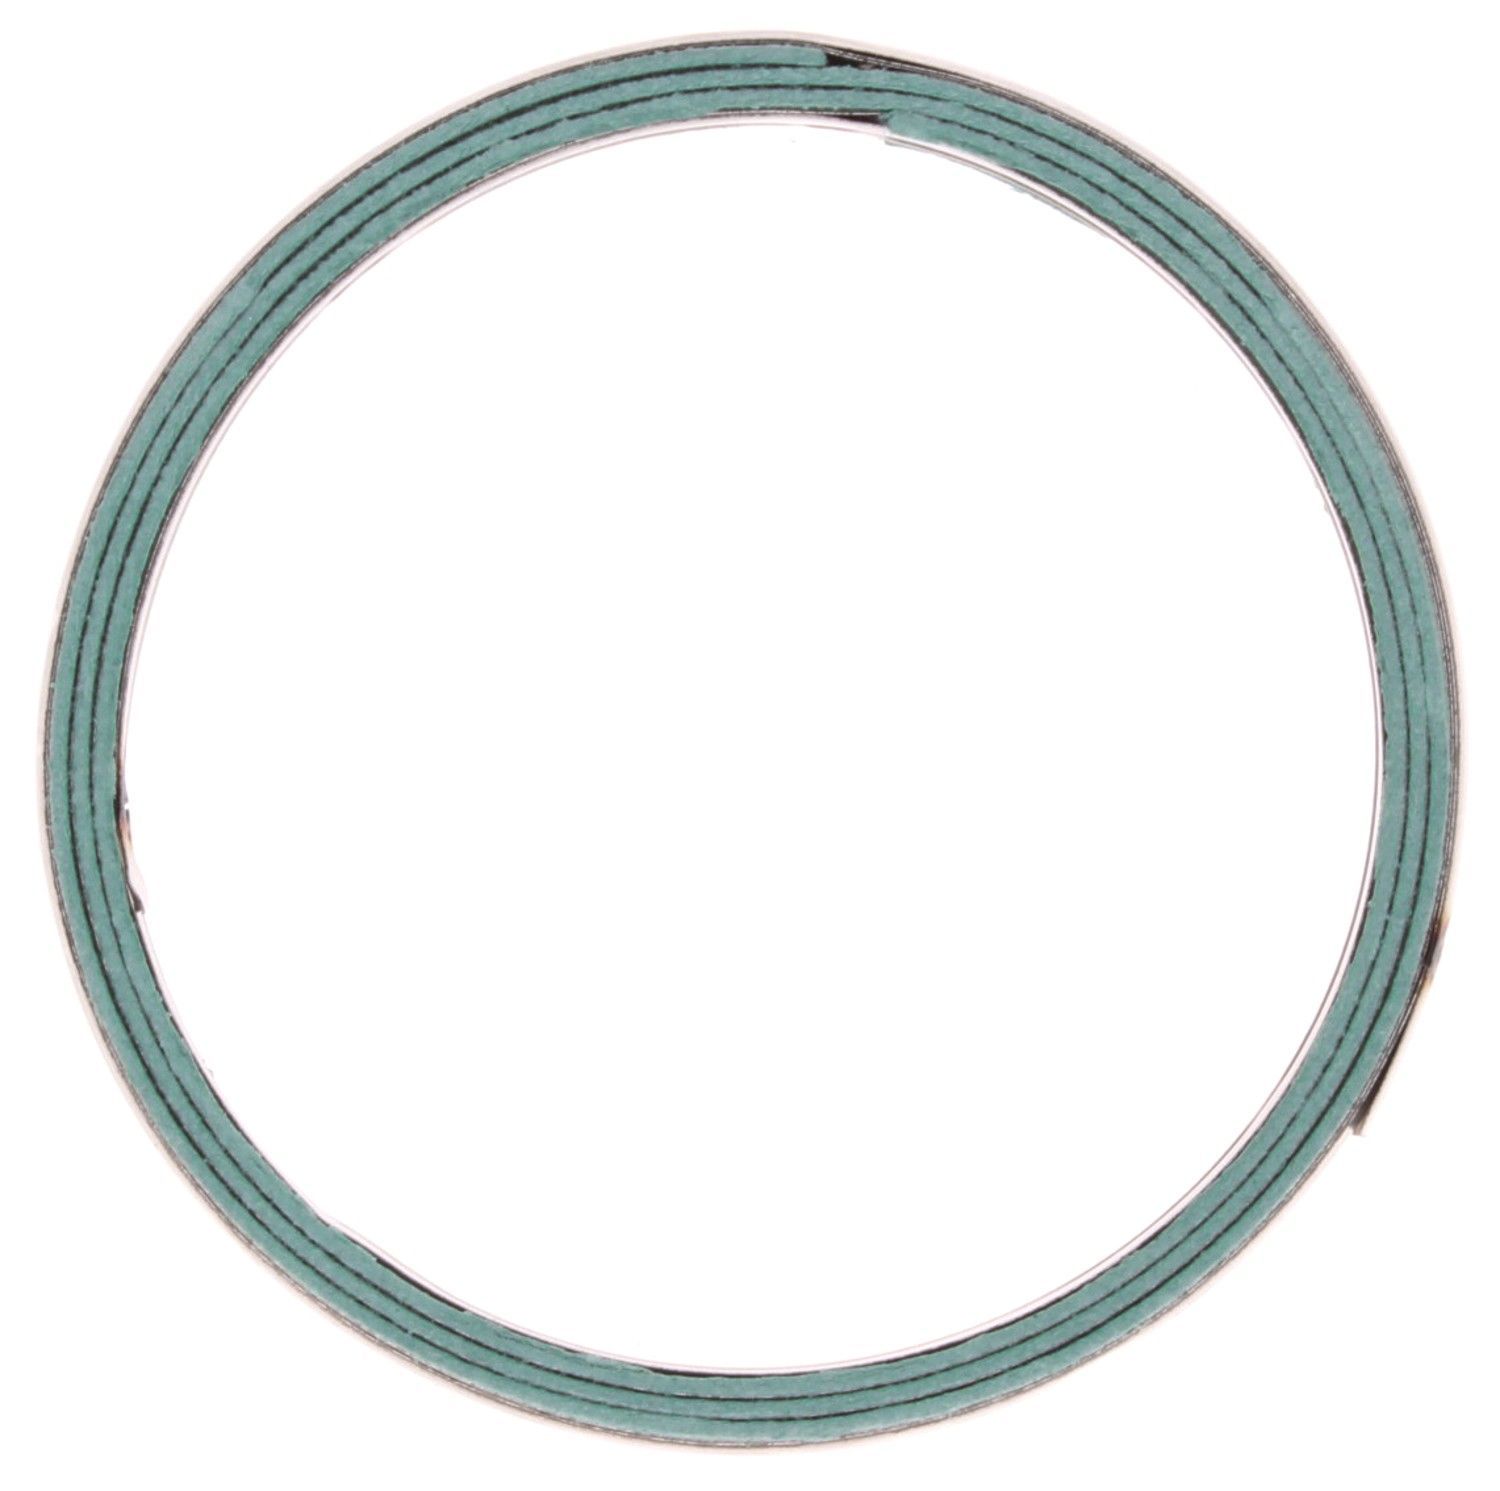 MAHLE ORIGINAL - Exhaust Pipe Flange Gasket - MHL F32880